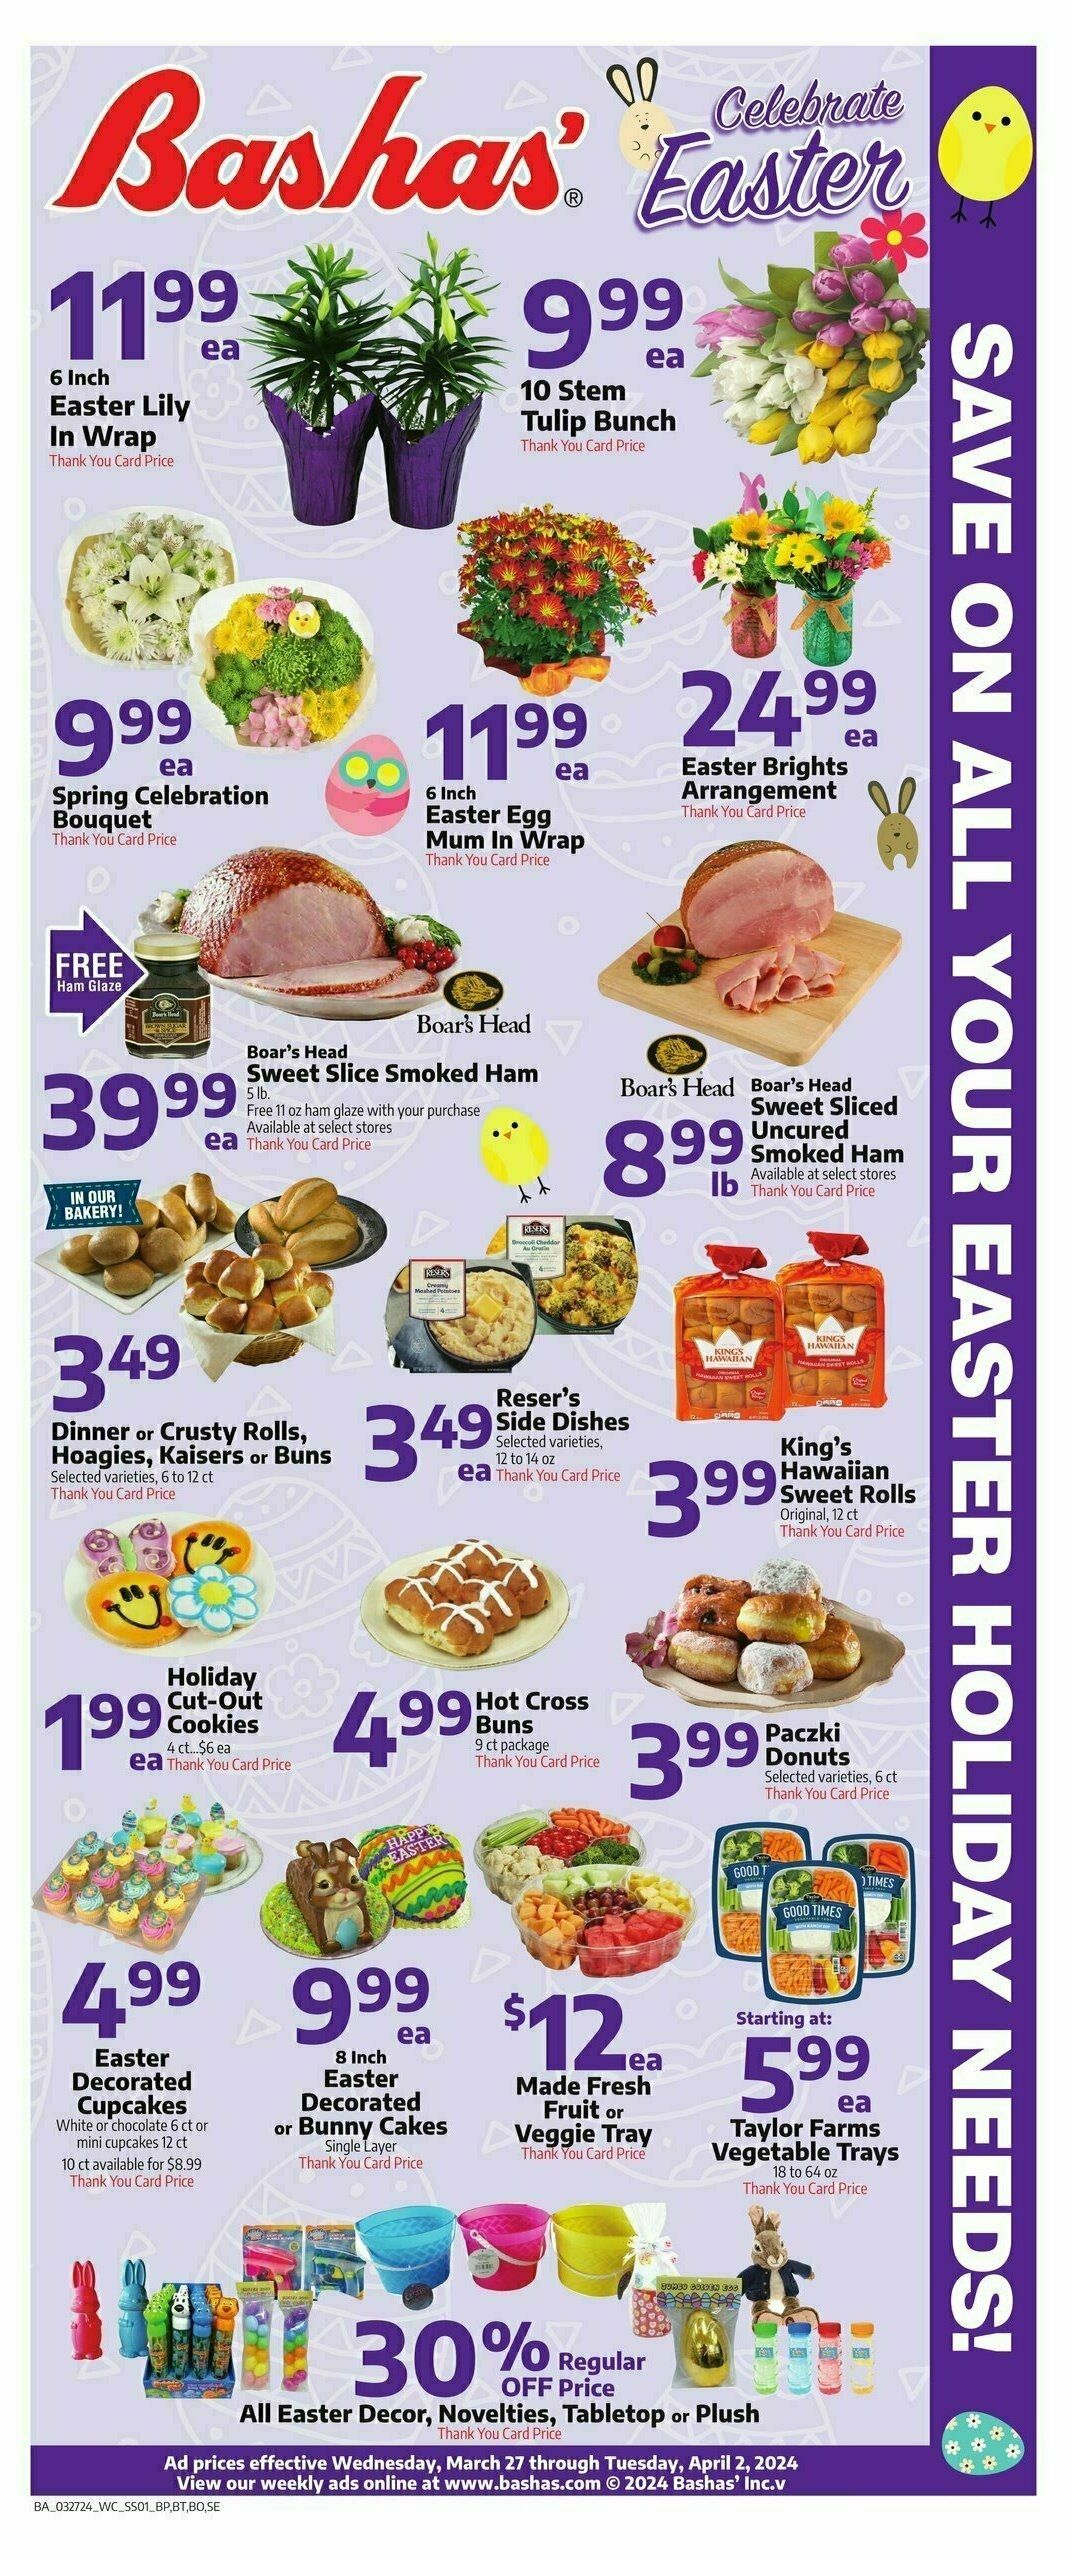 Bashas Weekly Ad from March 27